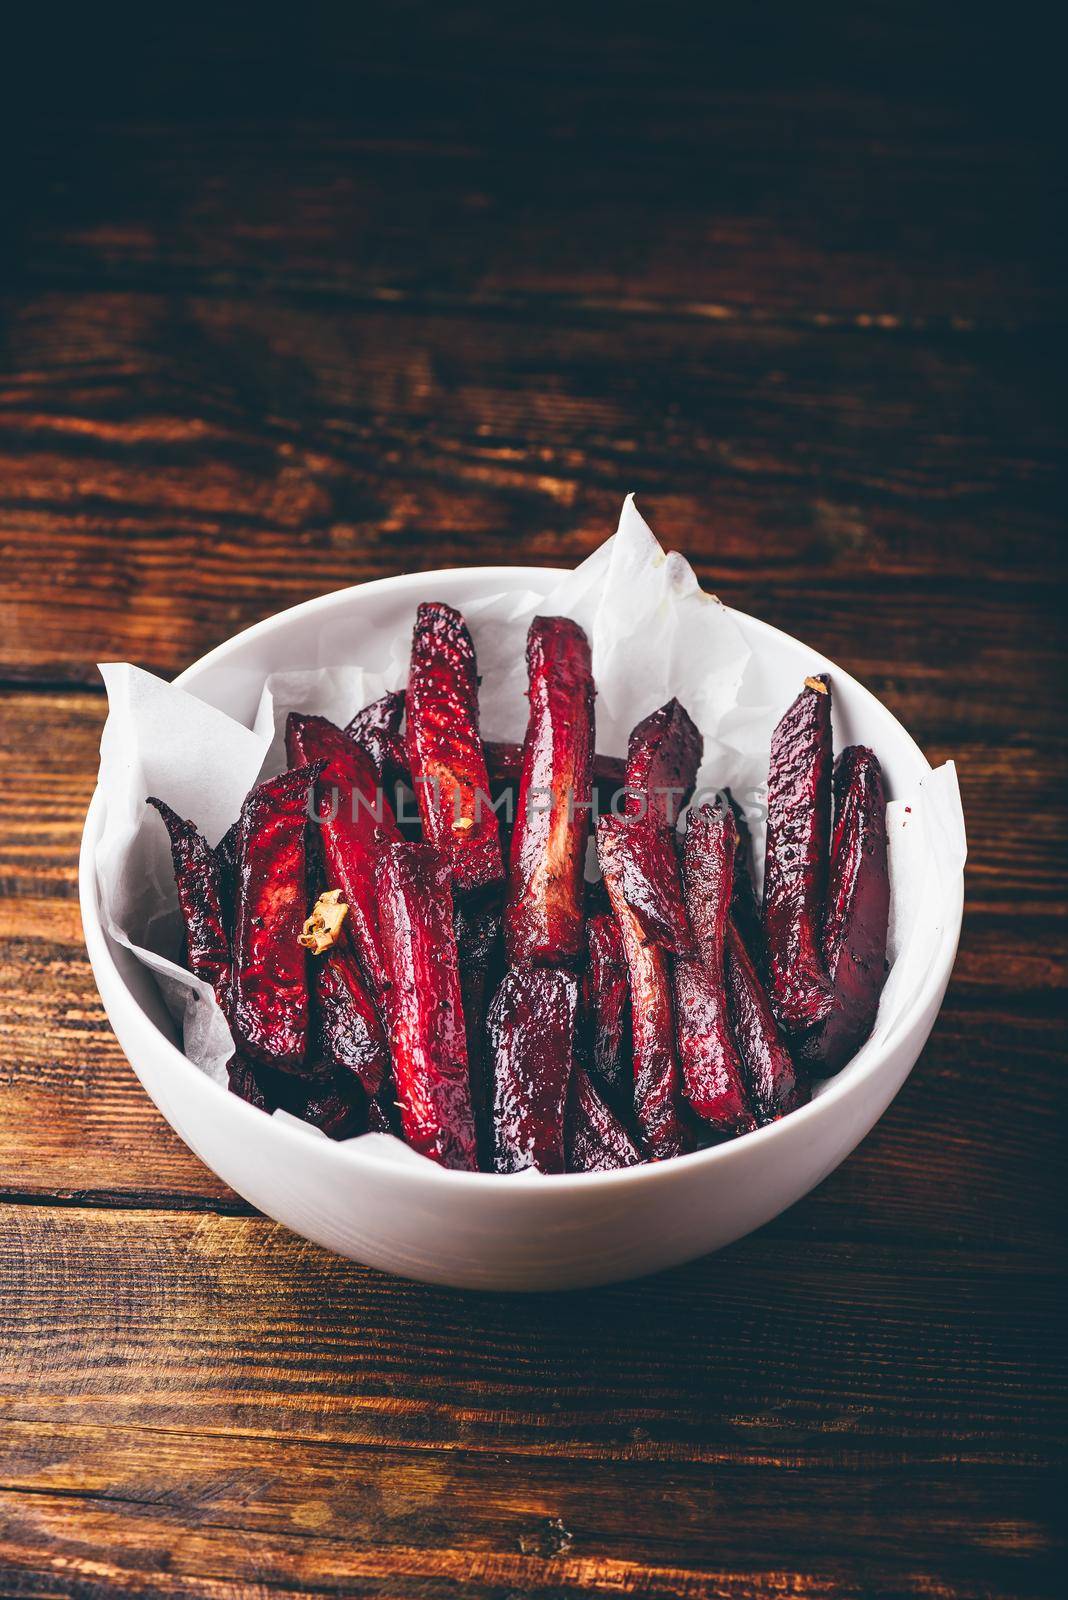 Oven baked beet fries in white bowl